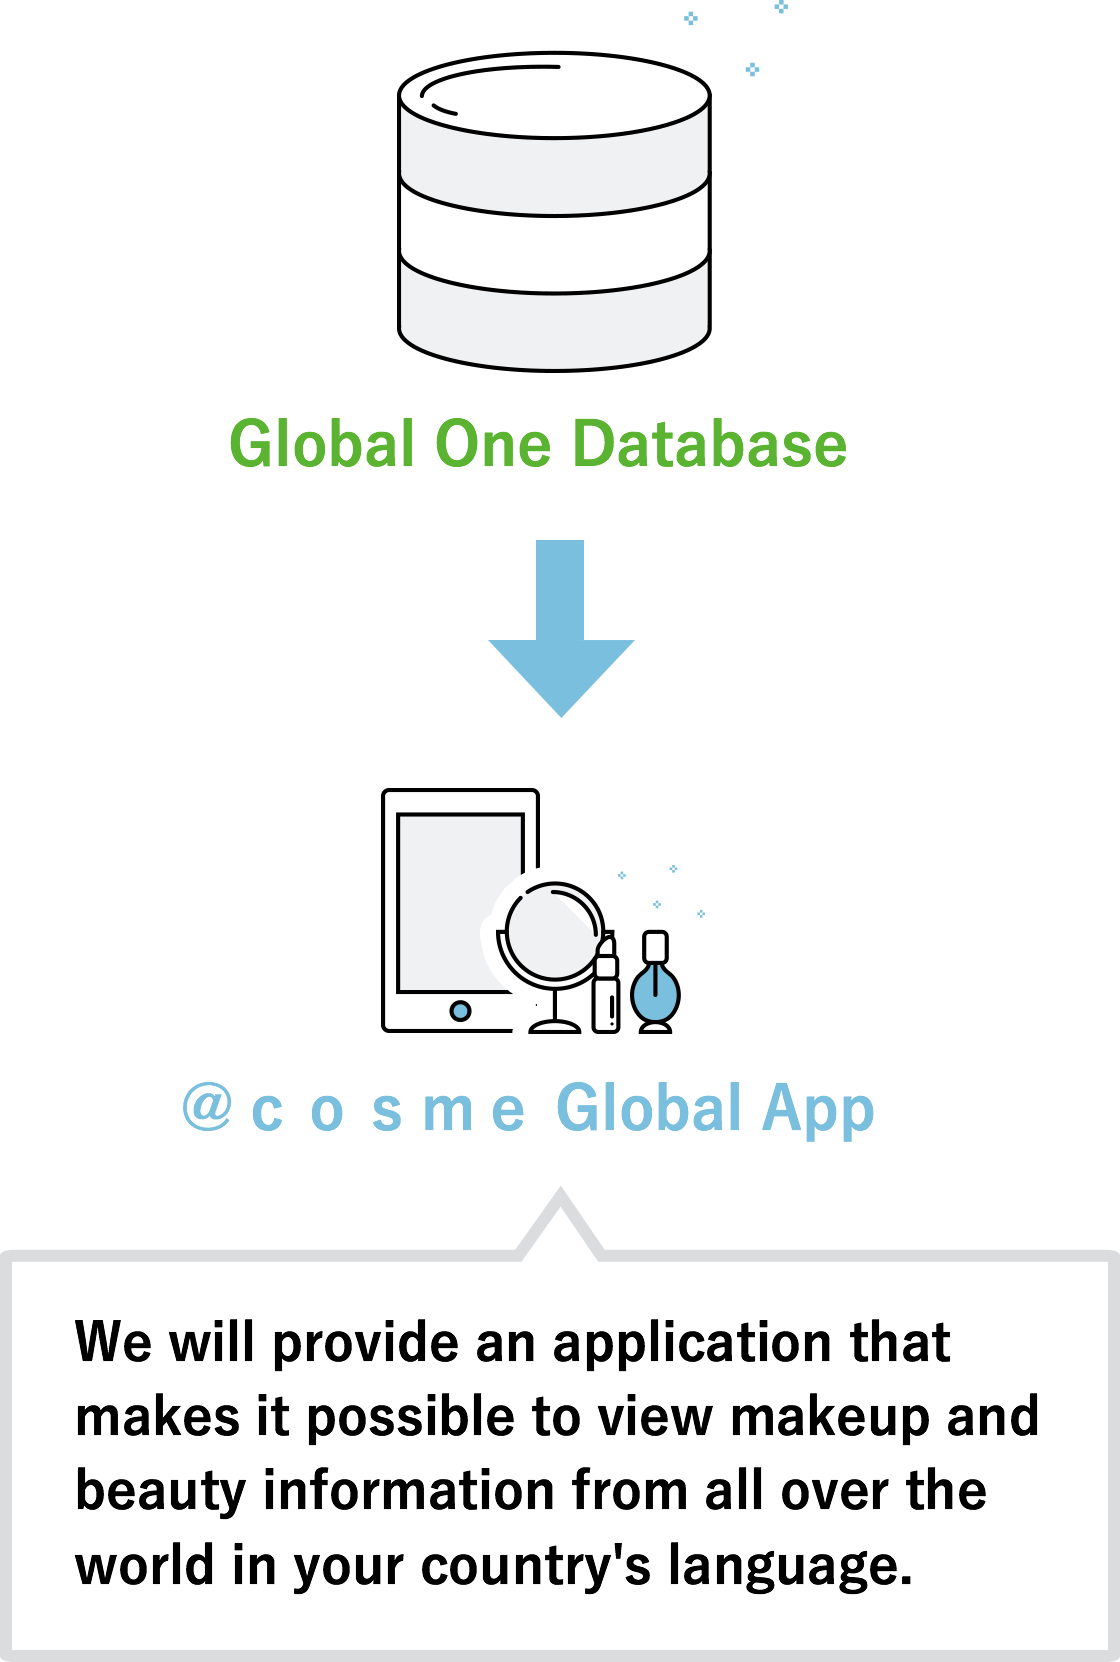 Global One Databaseから@cosme Global App We are developing a global app that would allow users around the world to use a single, unified ID to access @cosme content (global cosmetics reviews, beauty data, et cetera) in their language of choice.